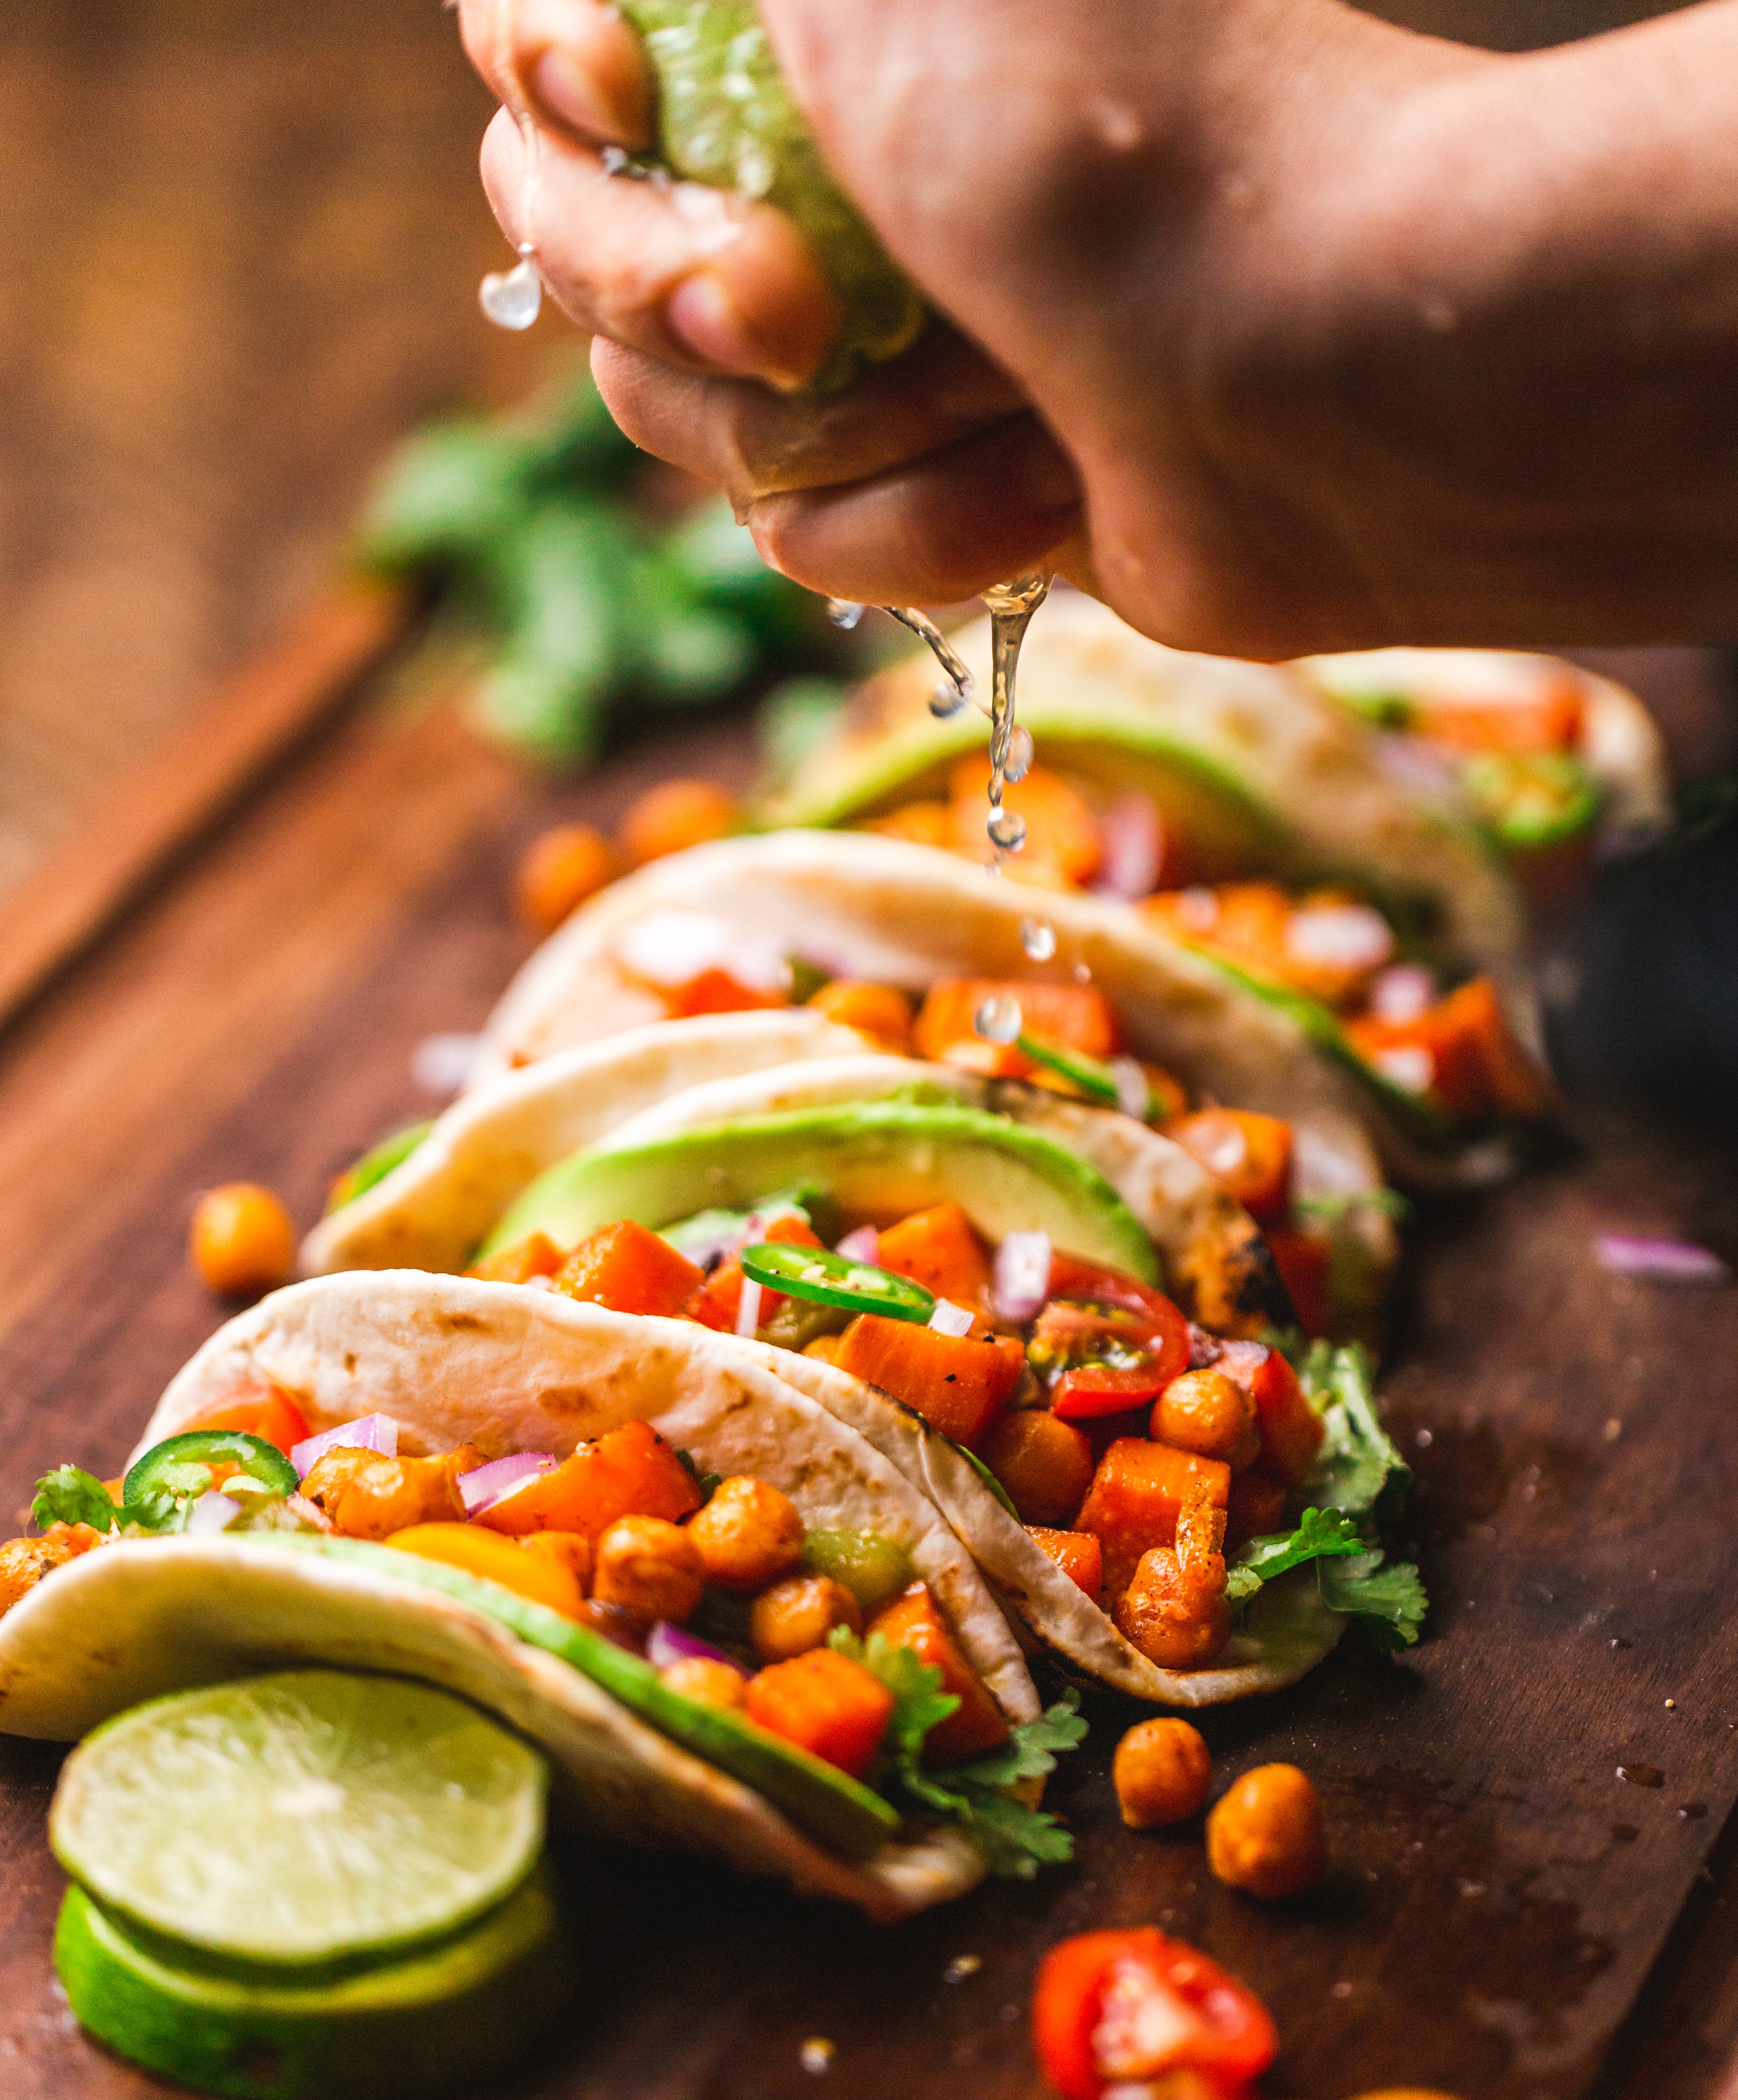 A Hand Squeezing Lime Juice Over A Line Of Tacos Filled With Avocado And Peppers